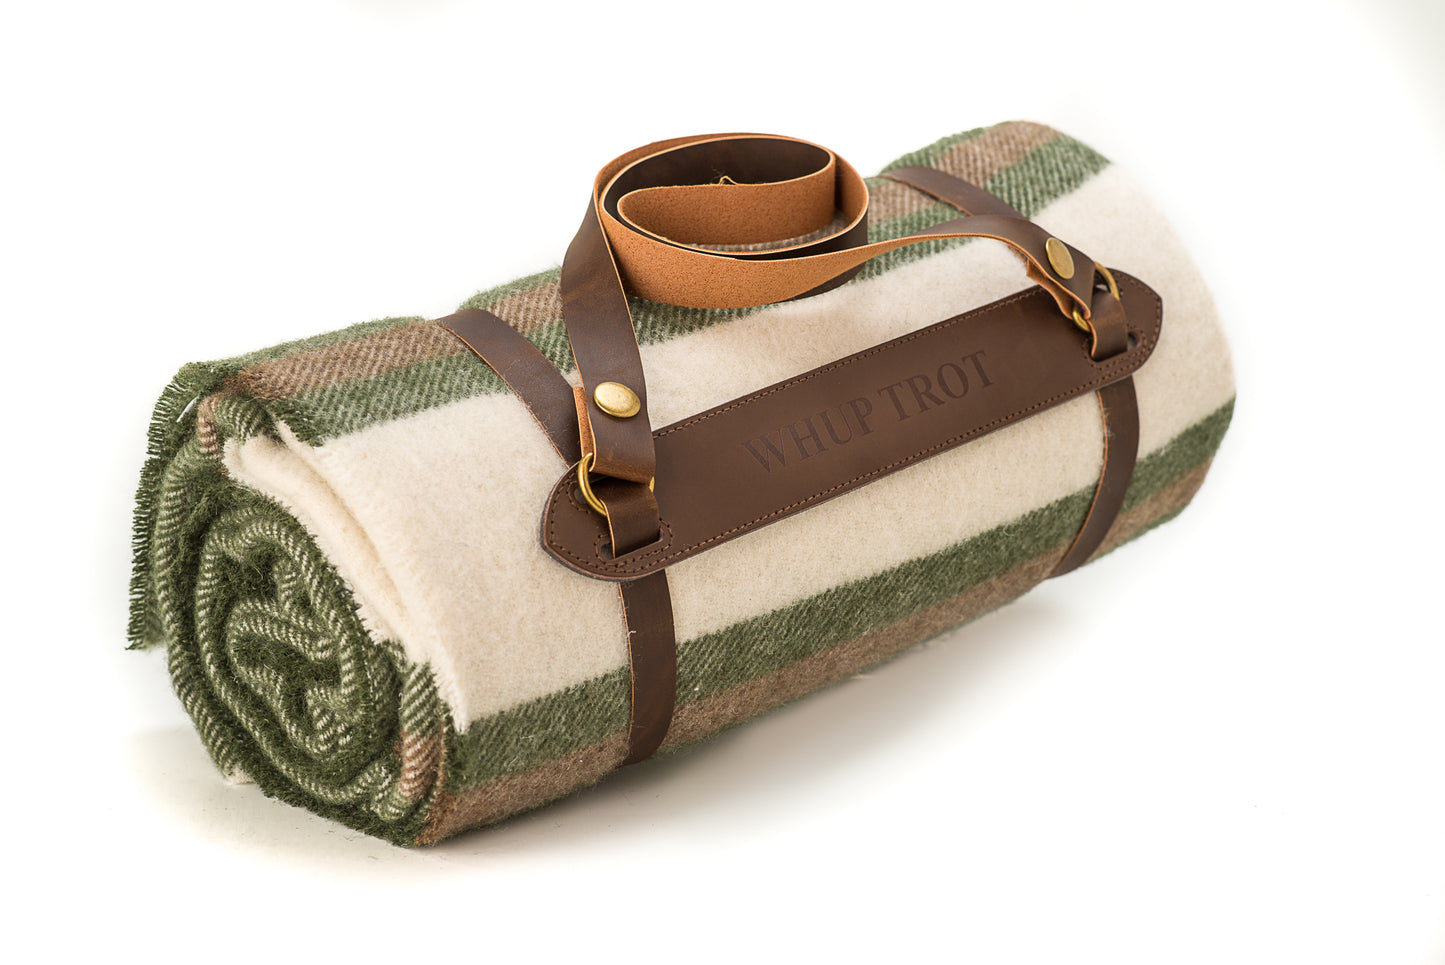 Whup Trot Travel Blanket Olive Green with Cream and Light Brown Stripes on Ends Rolled Up in Leather Carrier with Whup Trot Embossed